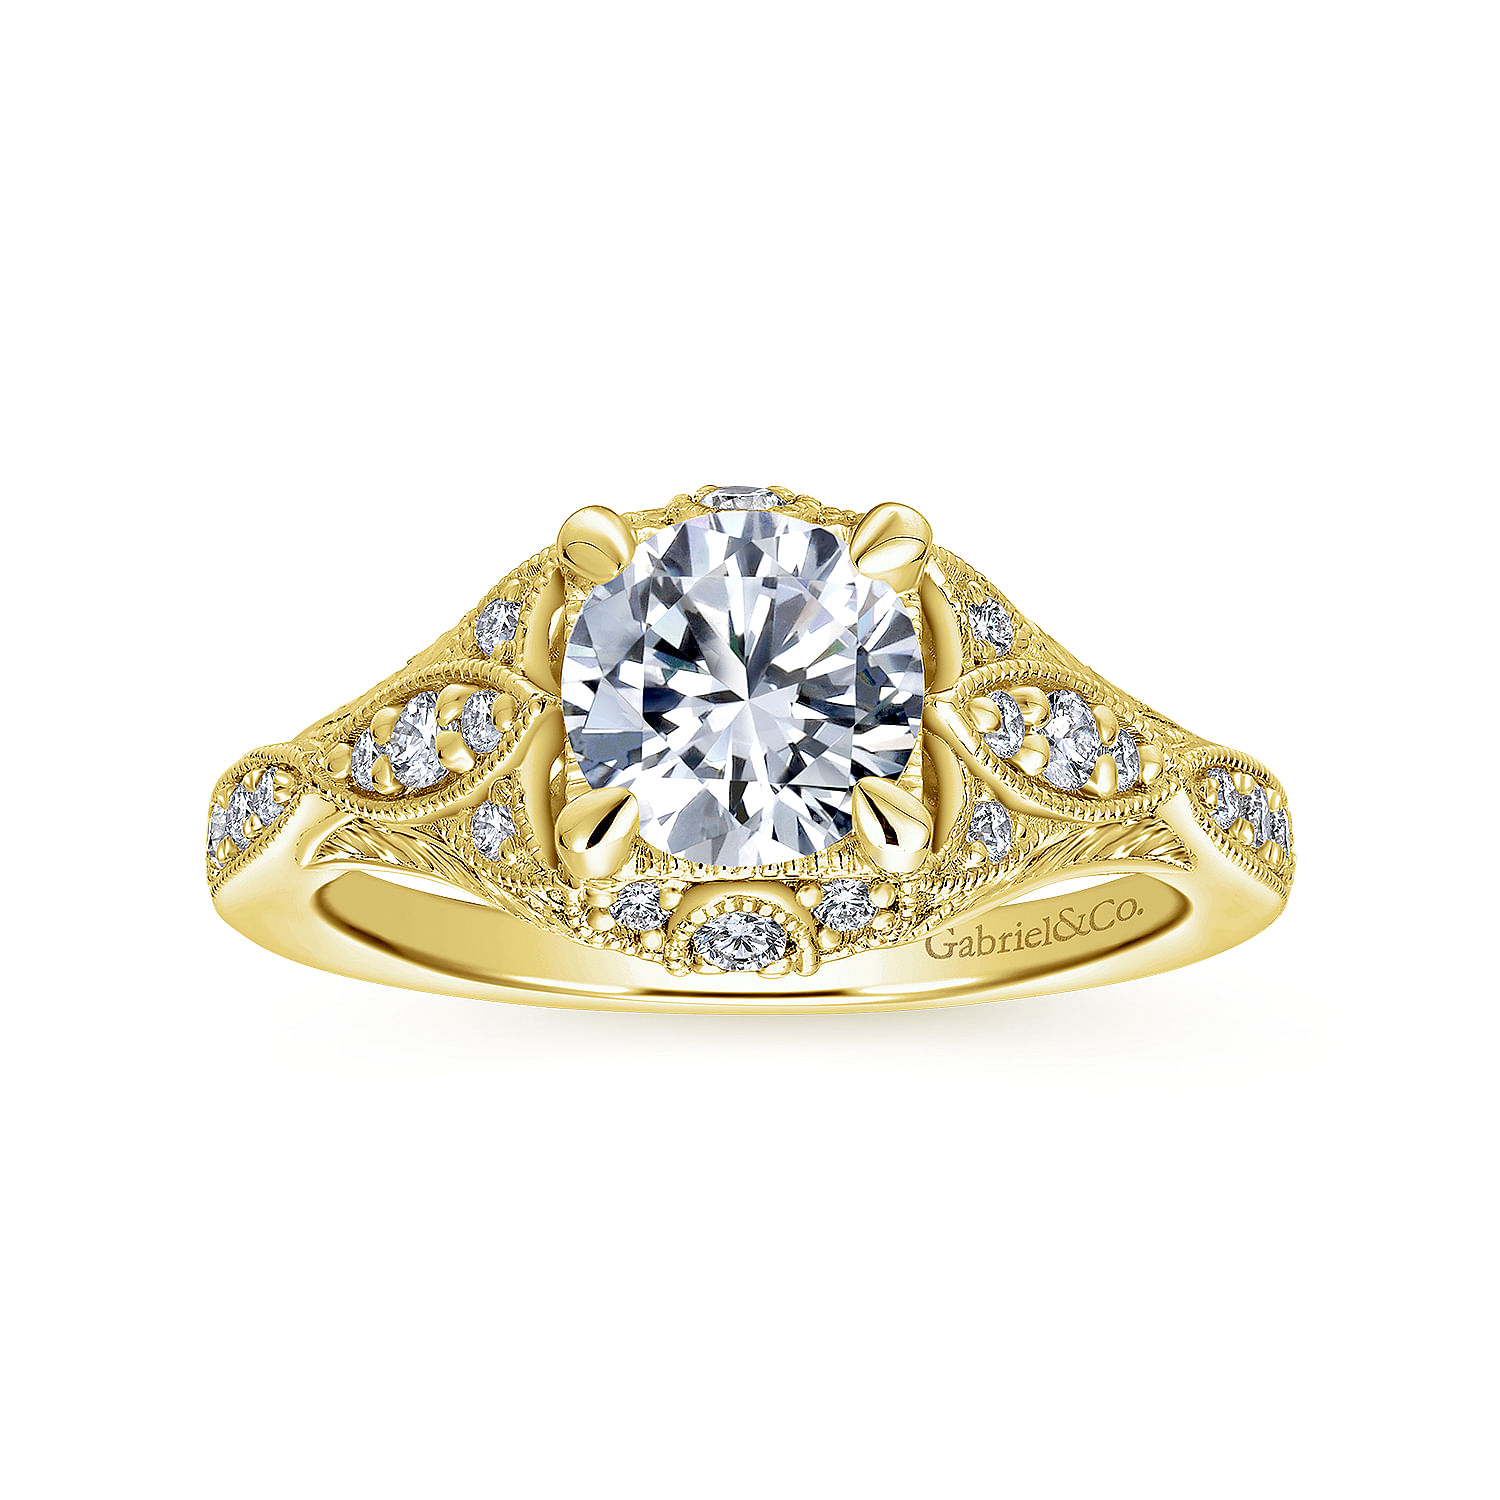 Unique 14K Yellow Gold Vintage Inspired Diamond Halo Engagement Ring